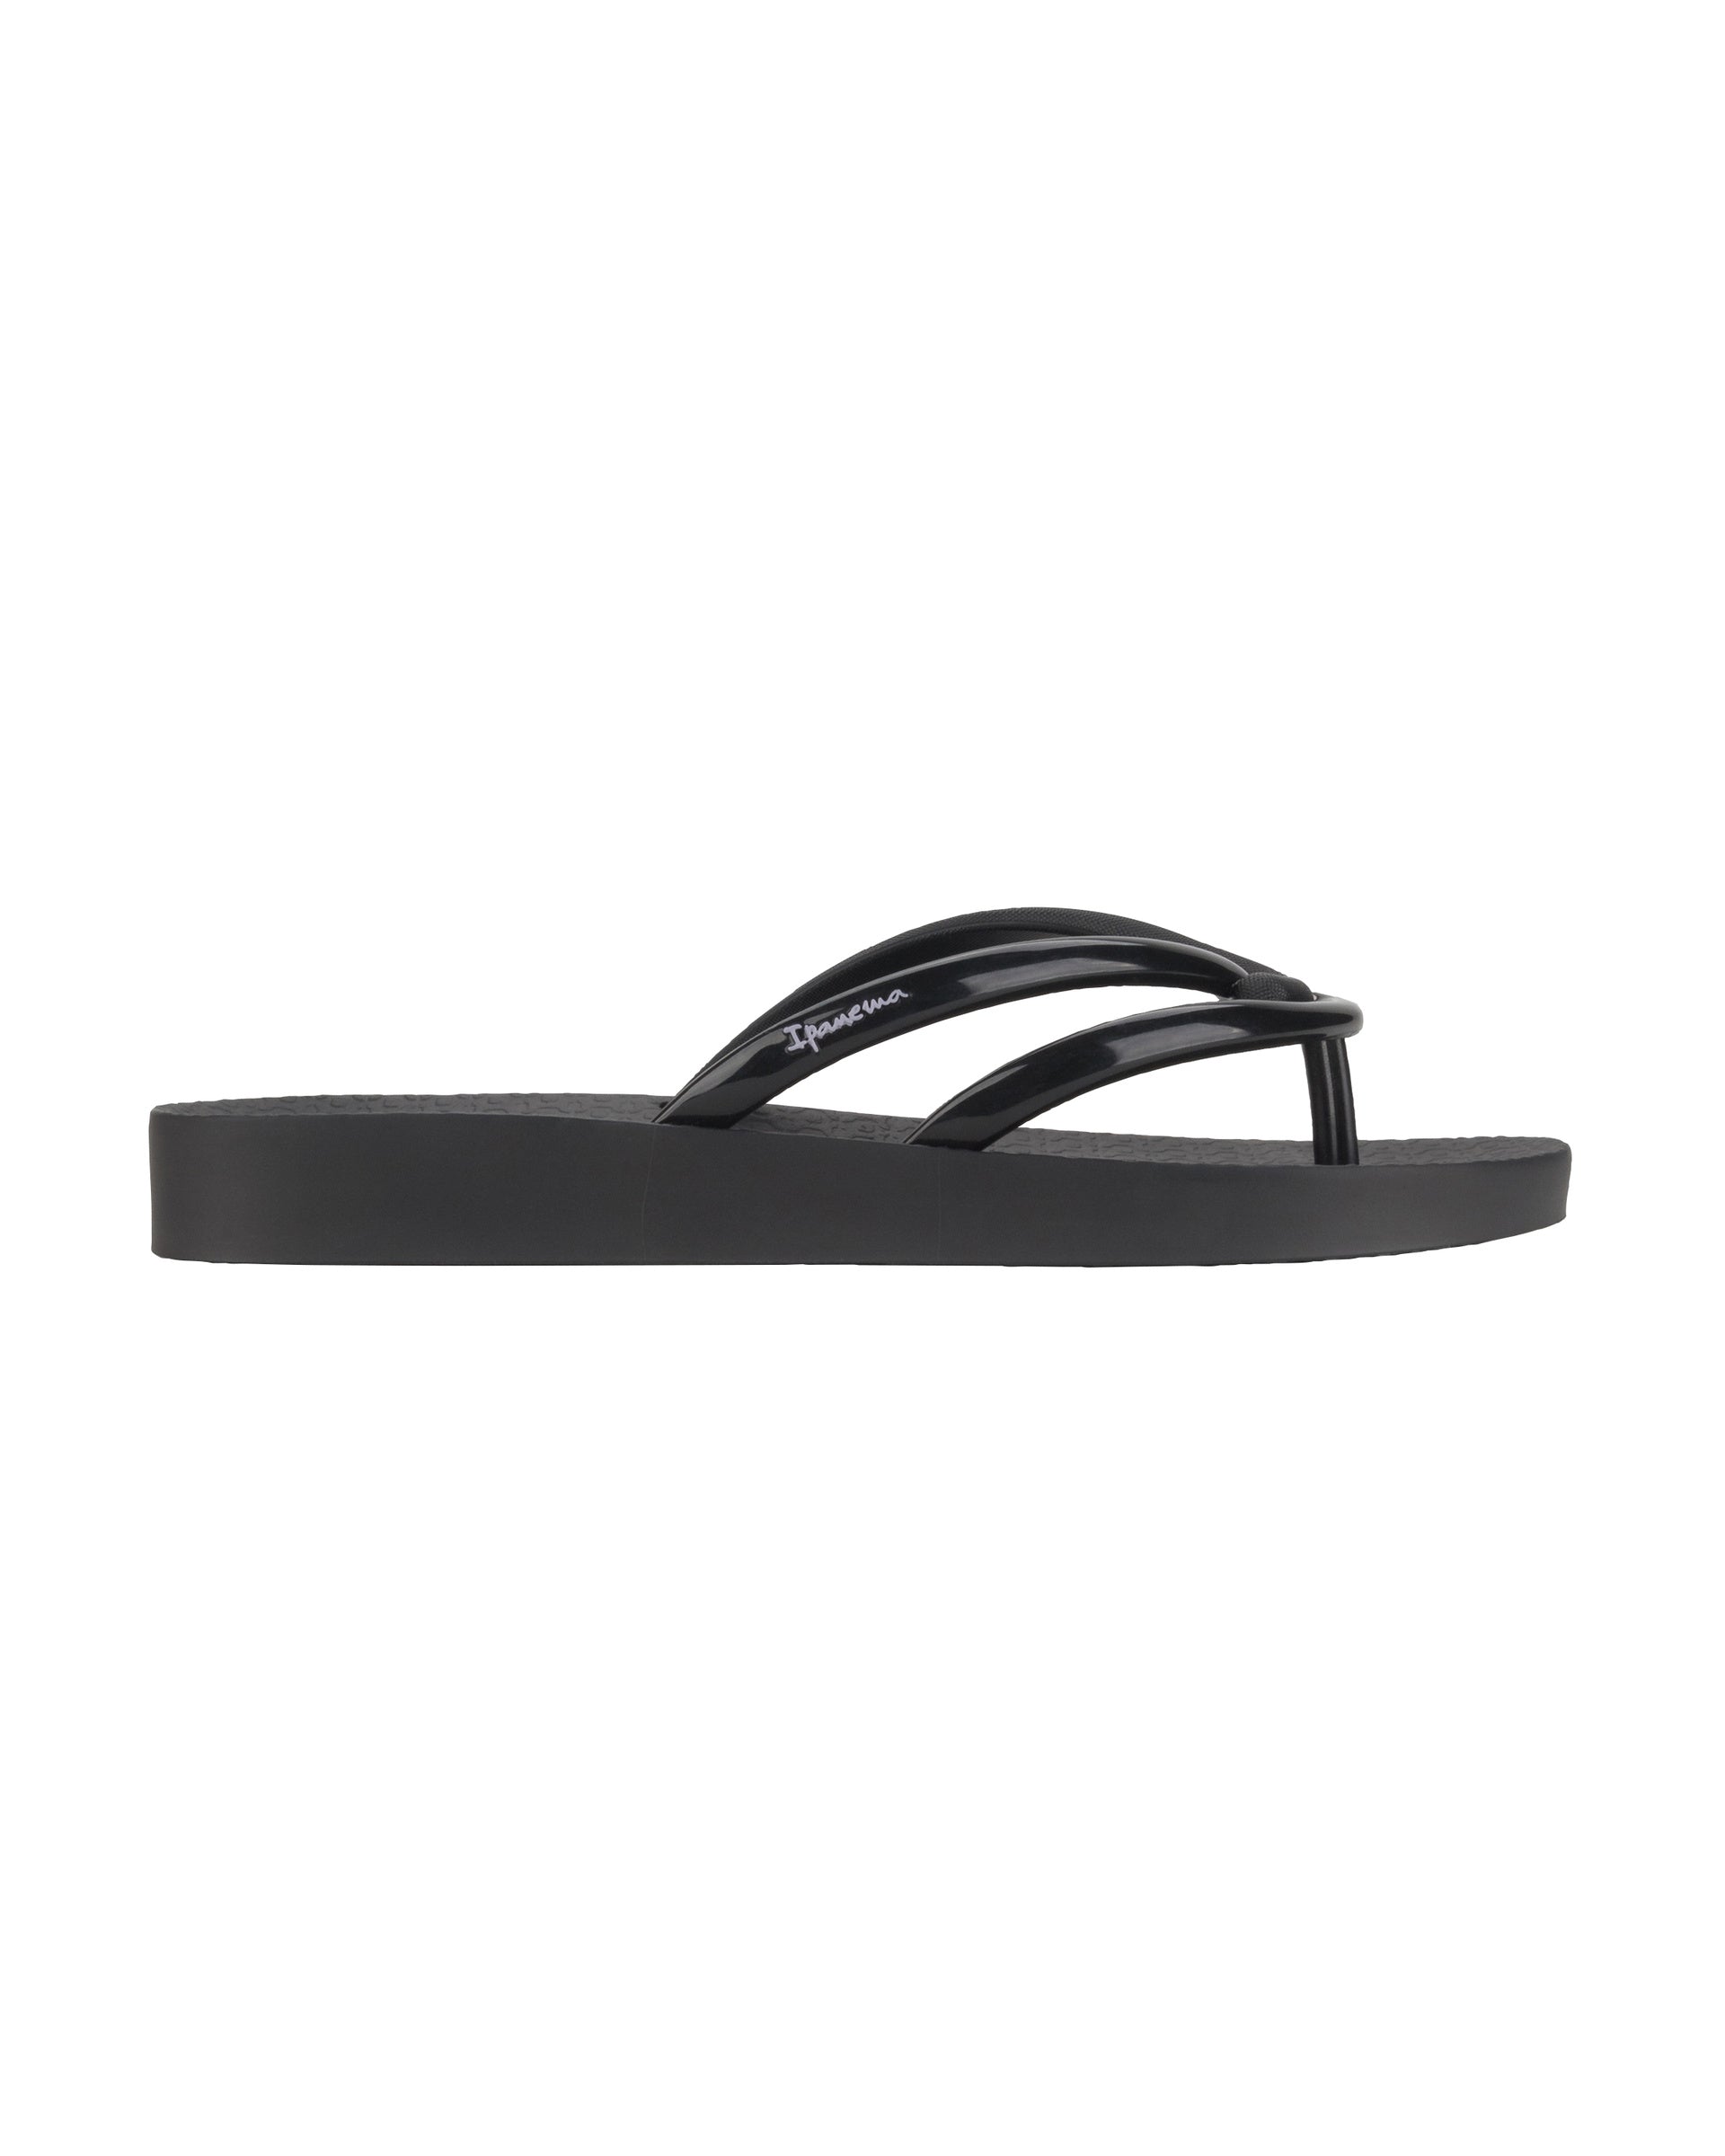 Outer side view of a black Ipanema Comfy women's flip flop.